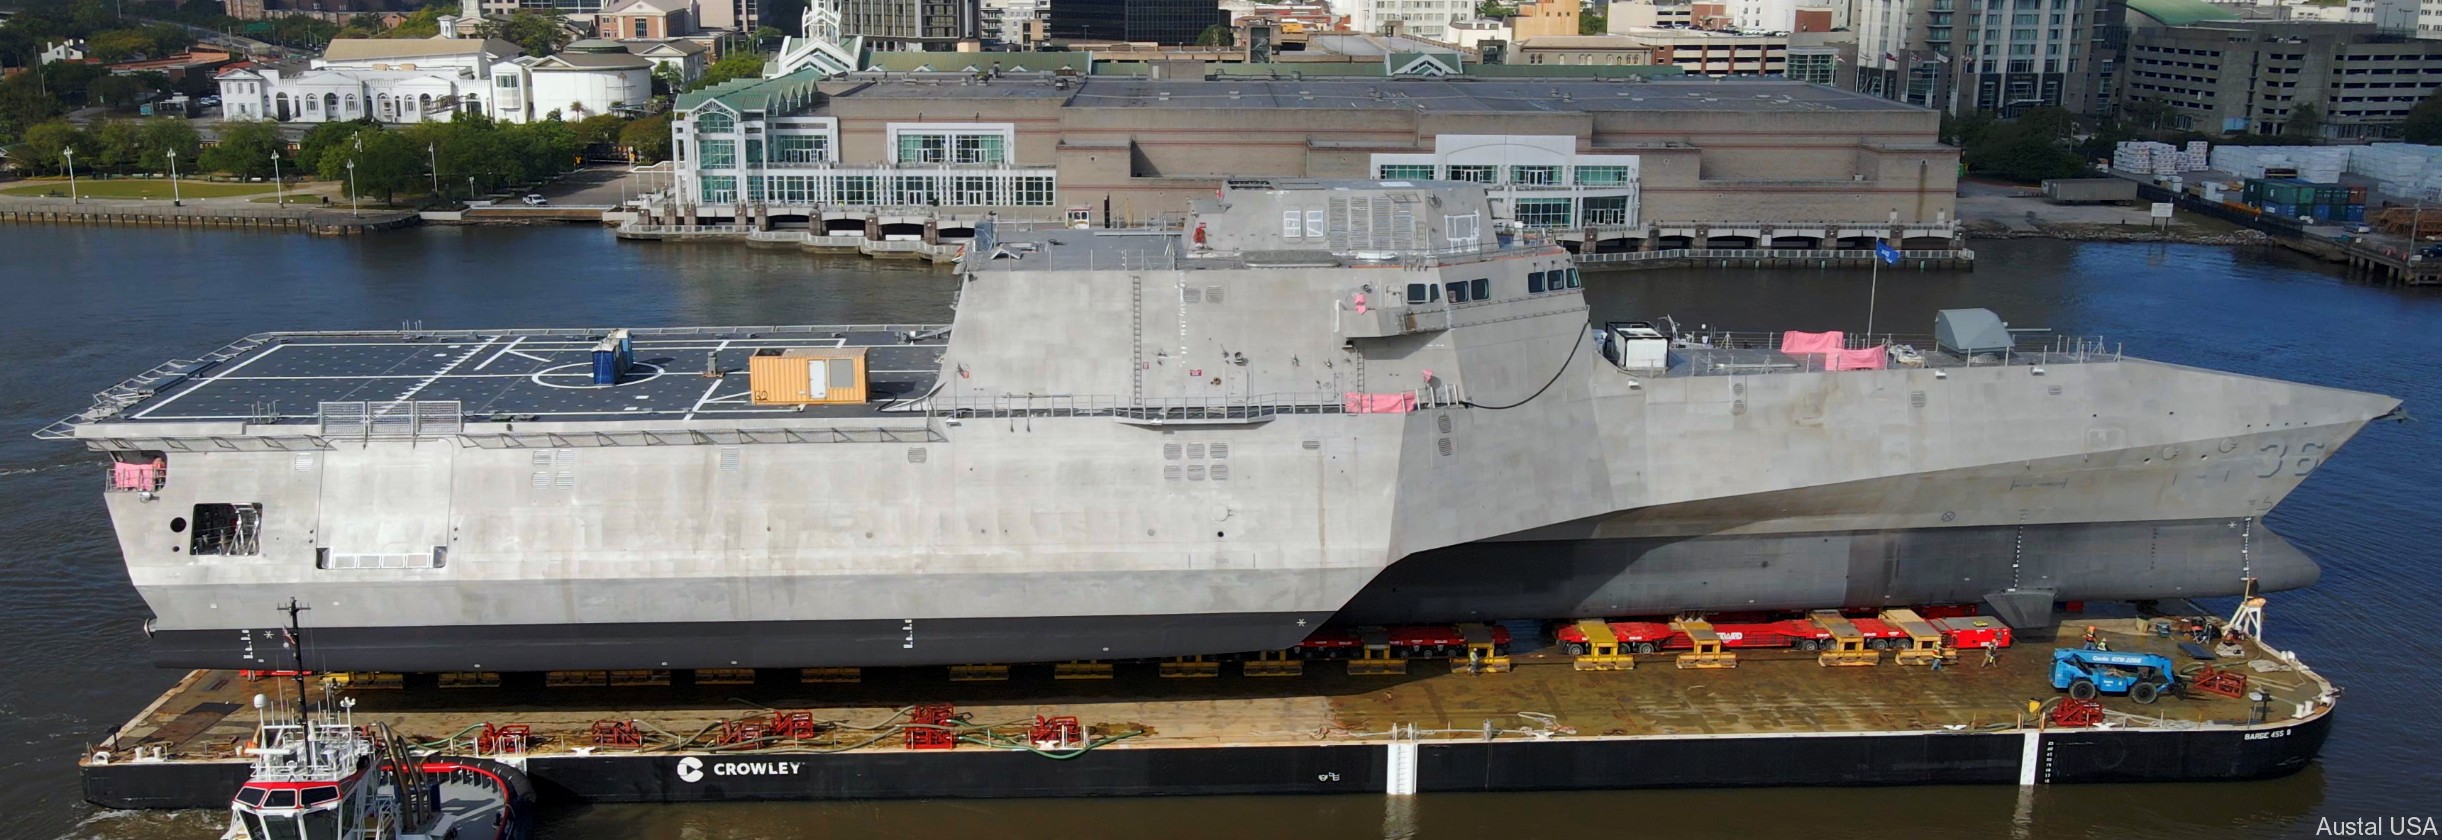 lcs-36 uss kingsville littoral combat ship independence class us navy 03 launching austal mobile alabama